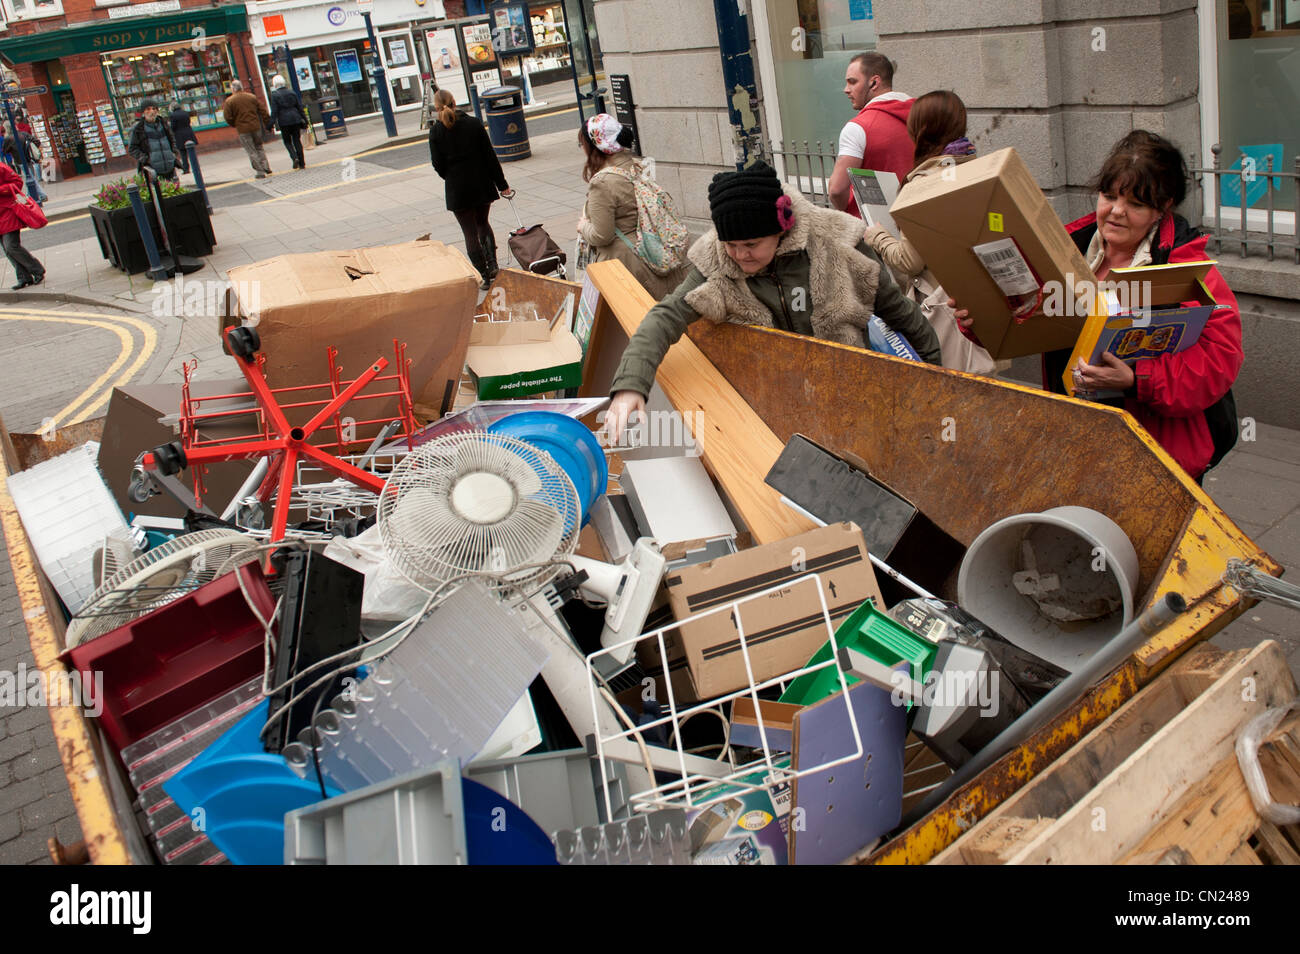 Skip raiding: People scavenging in a skip in the street for items thrown out by a shop, UK Stock Photo